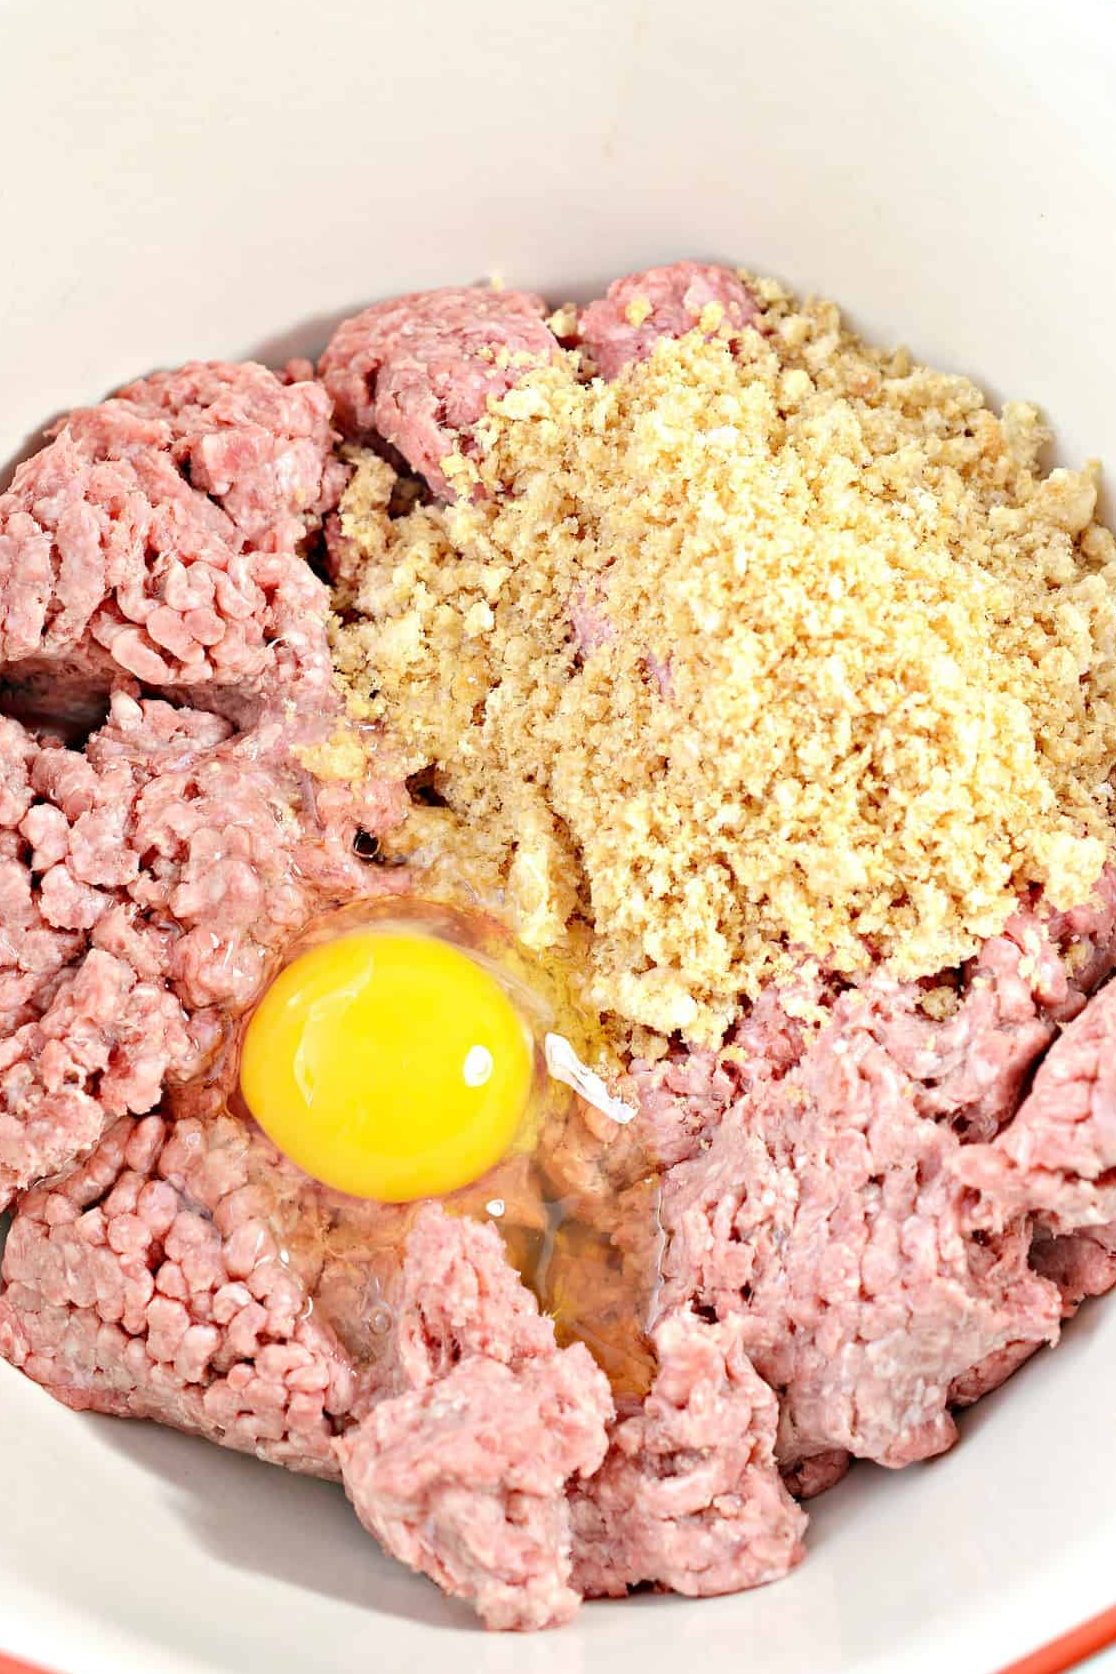 In a mixing bowl, combine the ground beef, bread crumbs, and eggs.